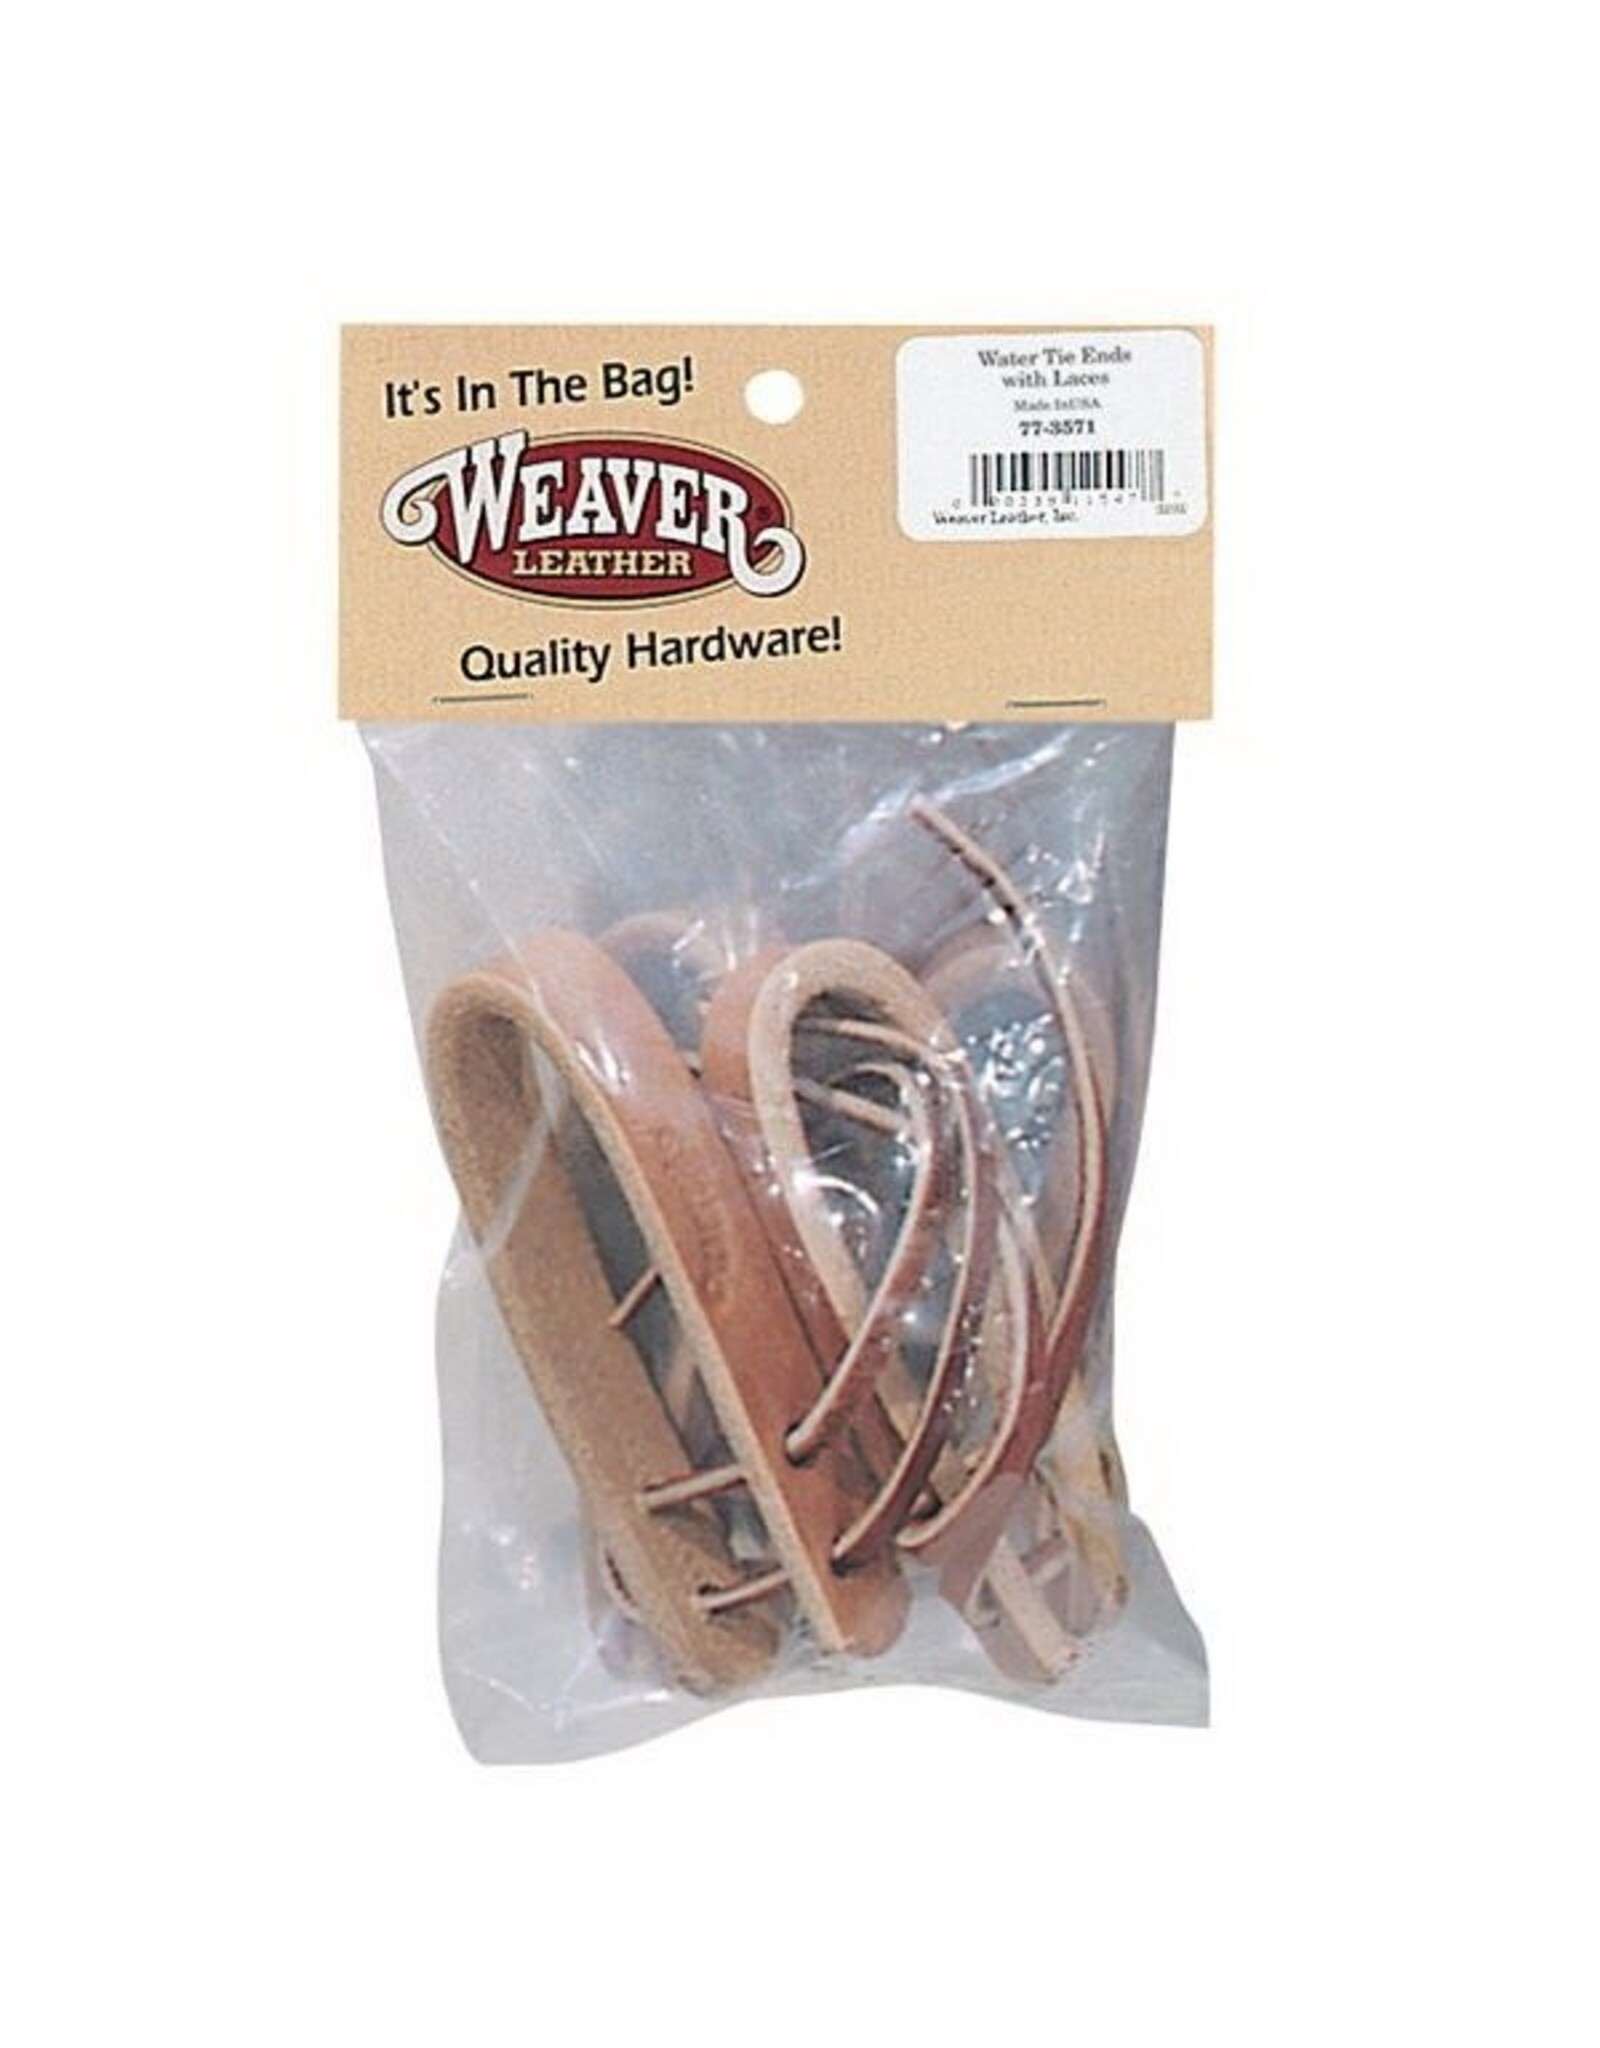 Weaver Leather Water Tie Ends w/Laces 77-3571